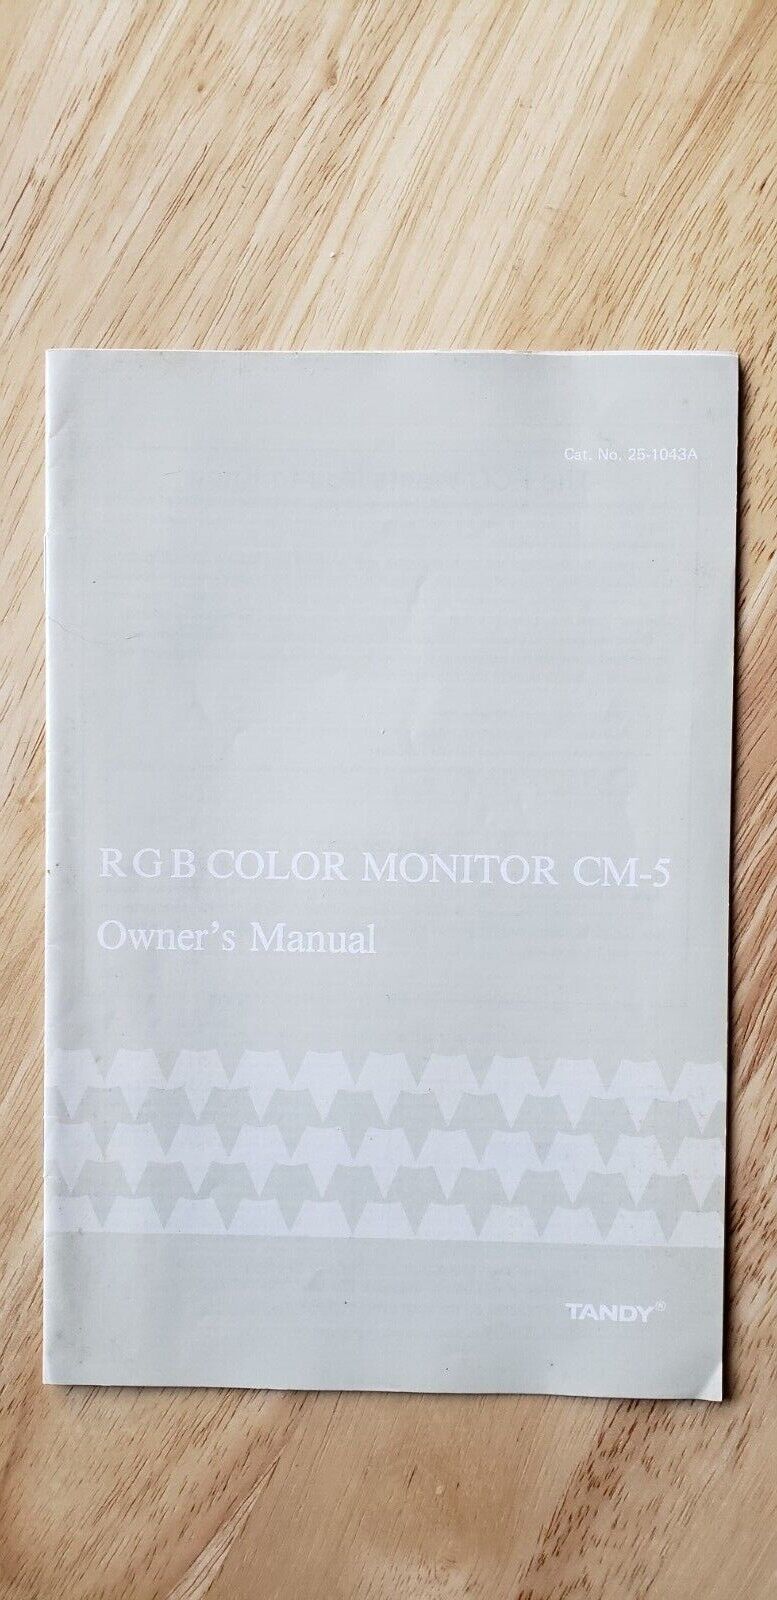 TANDY RGB COLOR MONITOR CM-5 owner s maunual 25-1043A